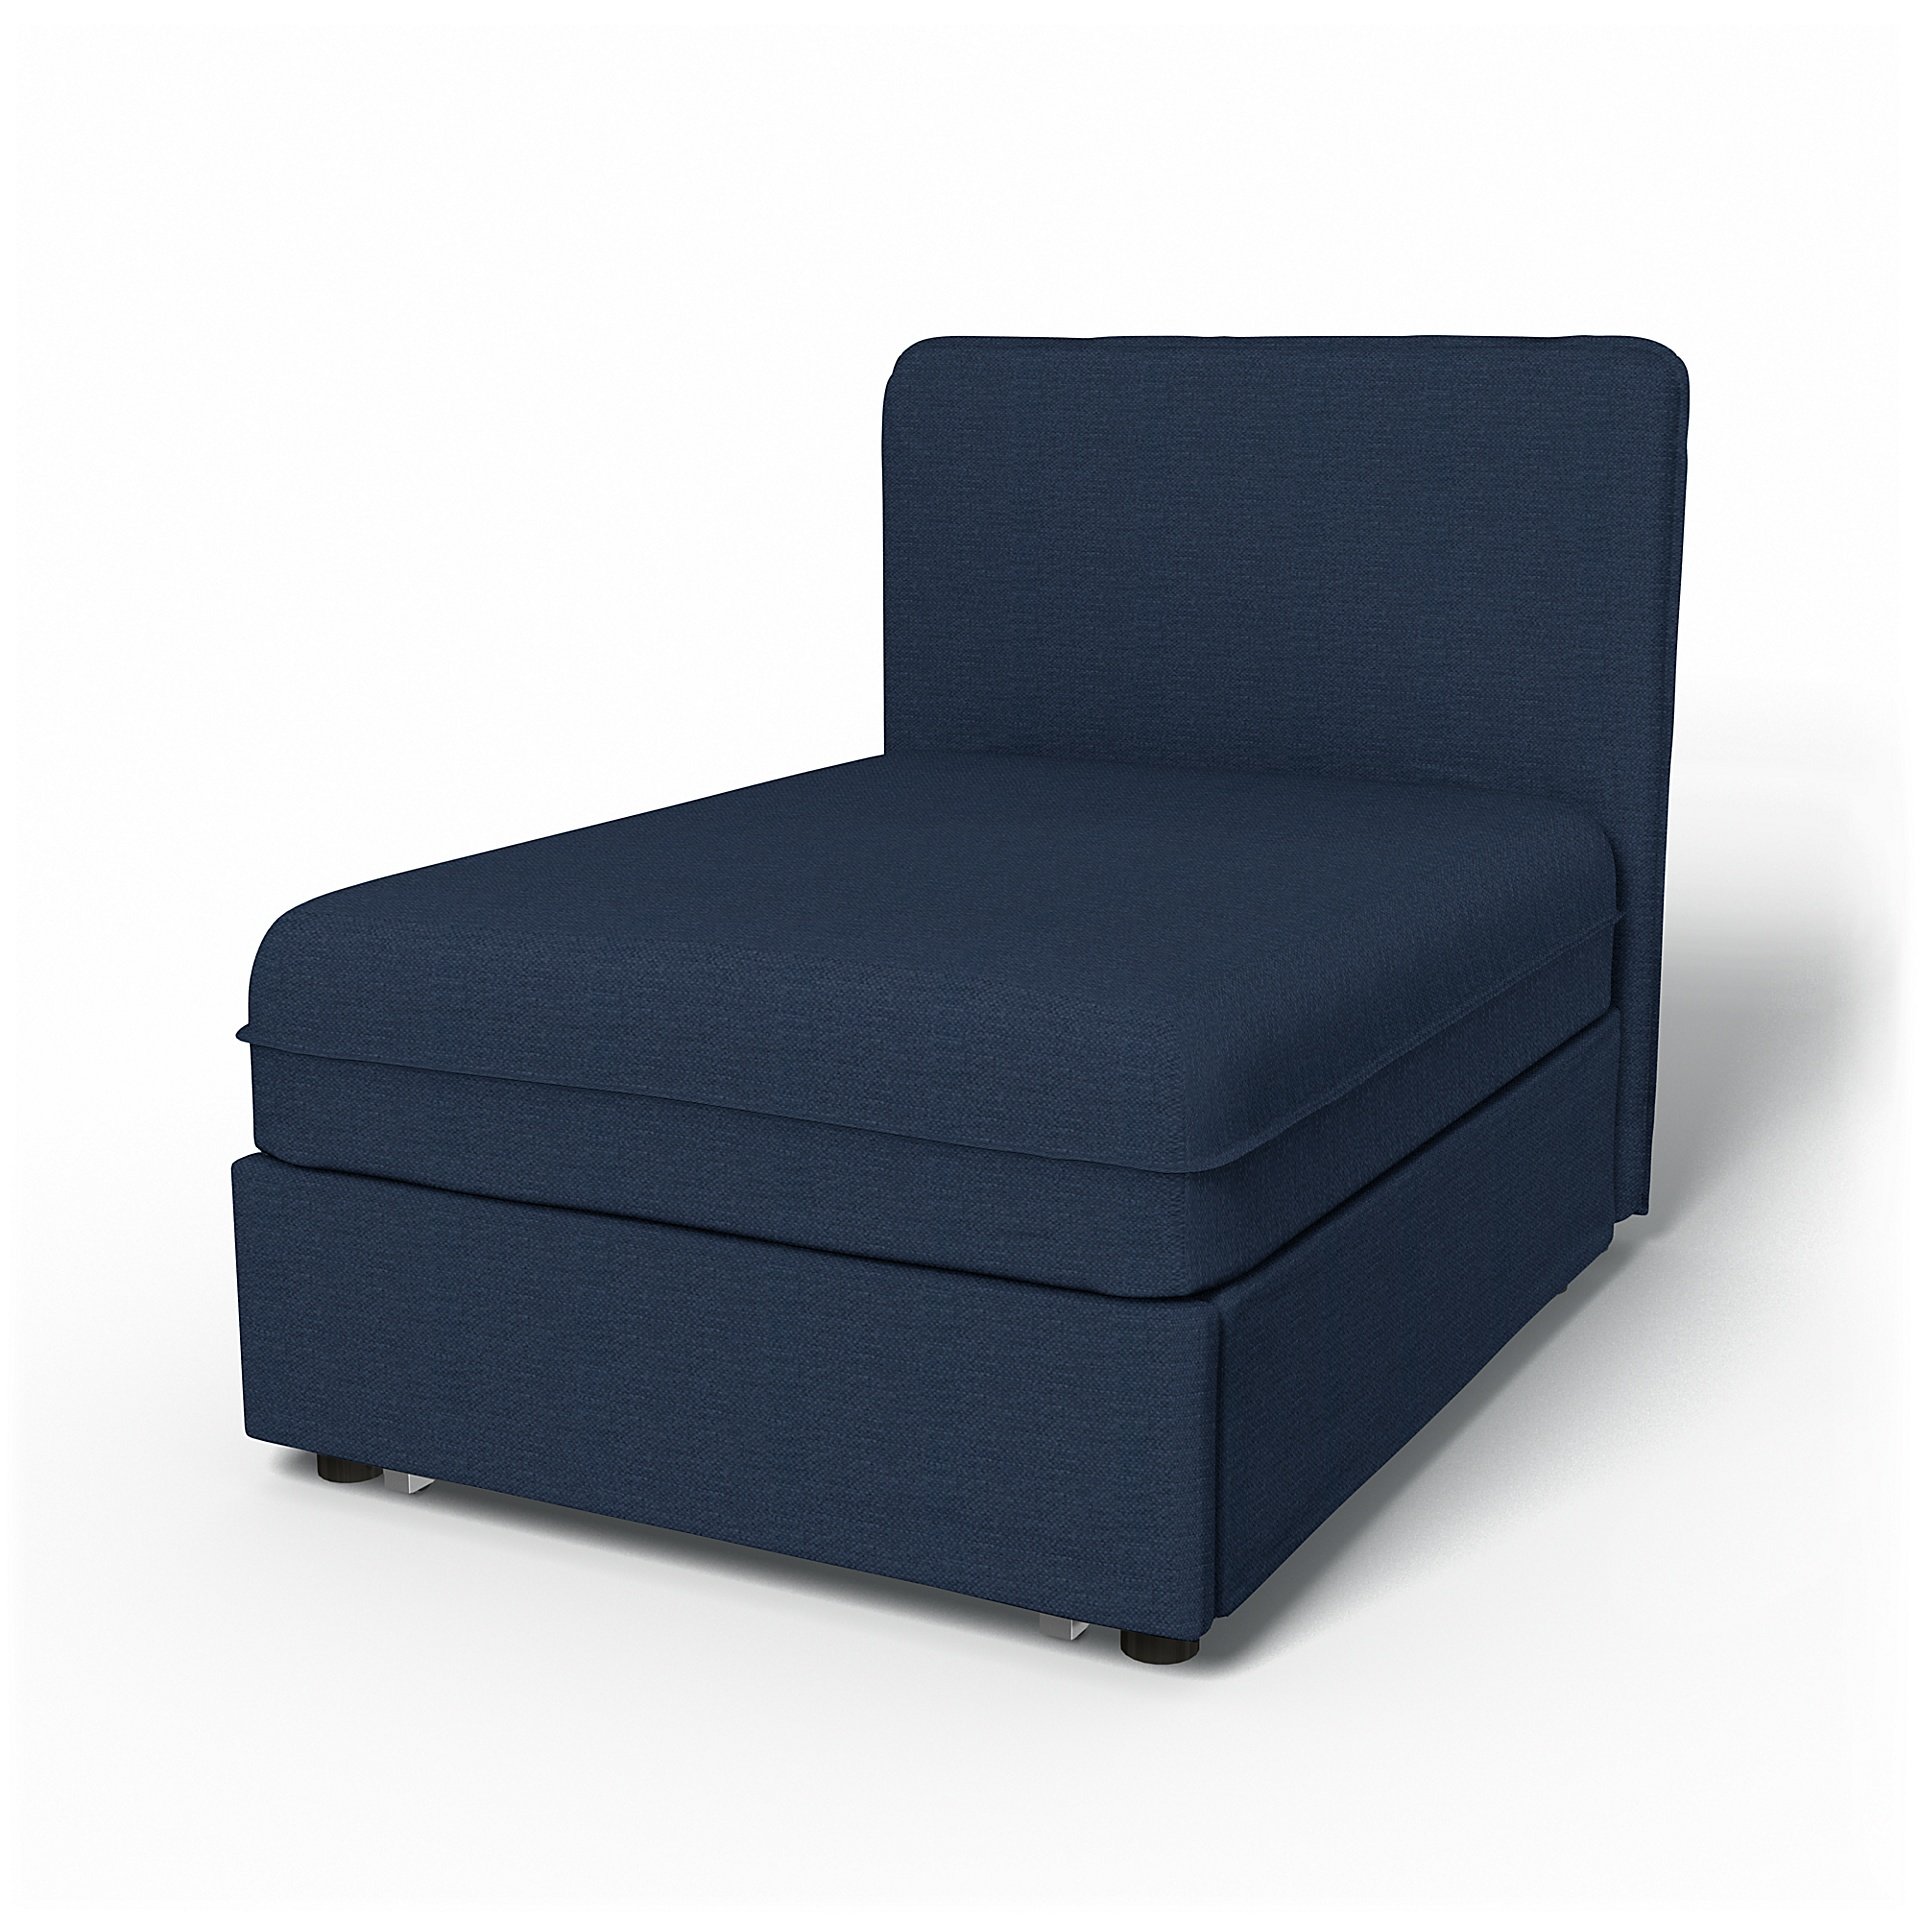 IKEA - Vallentuna Seat Module with Low Back Sofa Bed Cover 80x100 cm 32x39in, Navy Blue, Linen - Bem